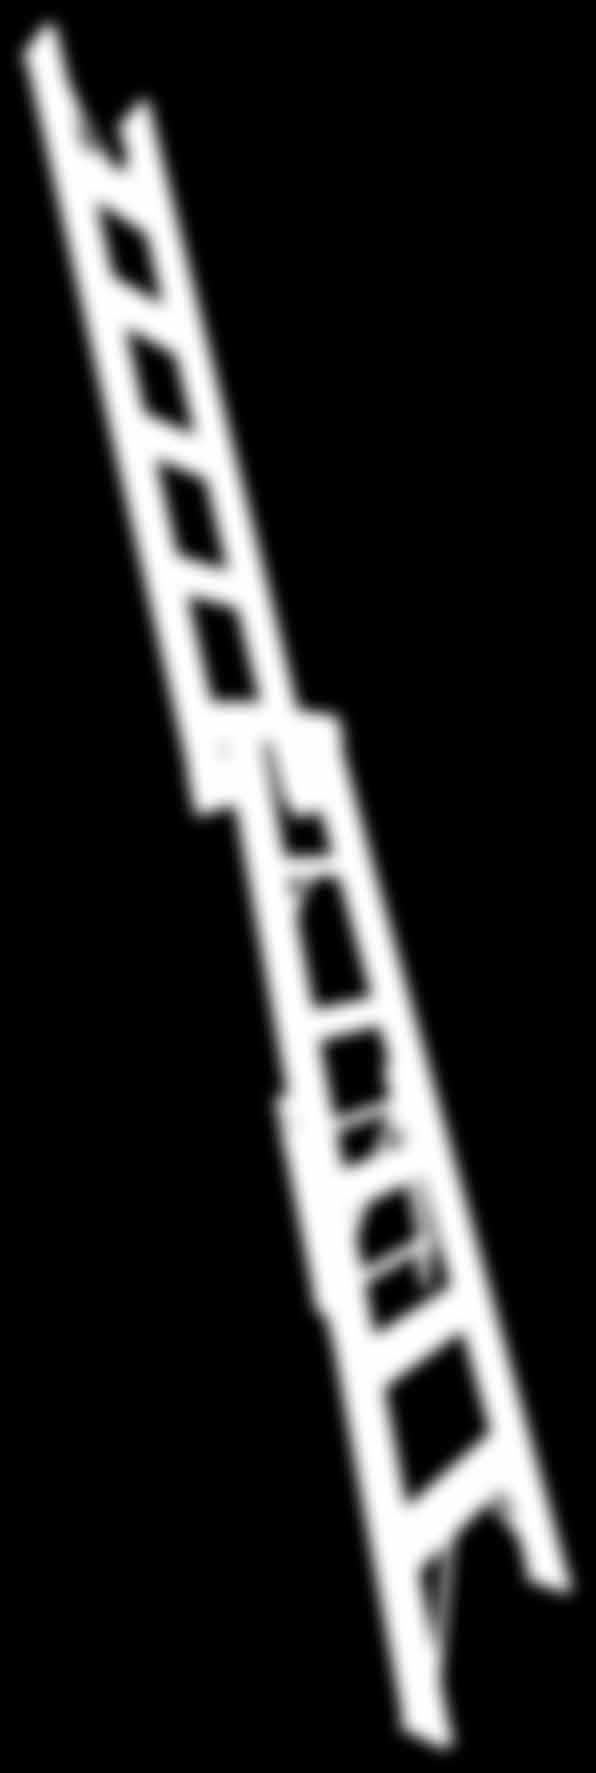 LIGHT TRADE DUAL PURPOSE LADDER 120KG Features and Benefits Use